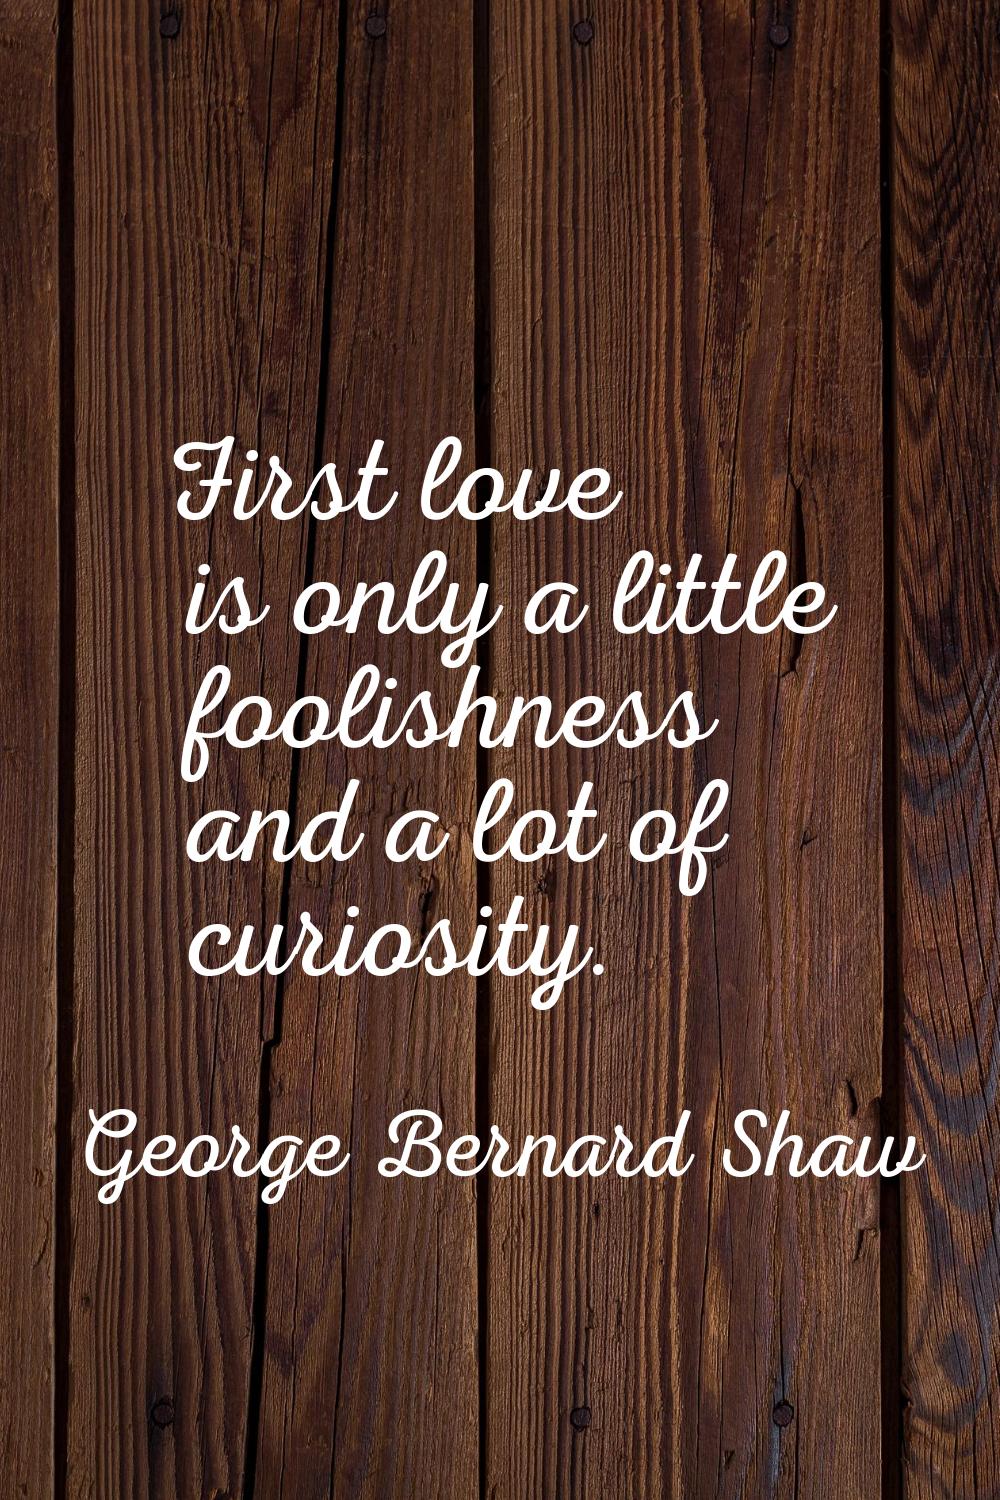 First love is only a little foolishness and a lot of curiosity.